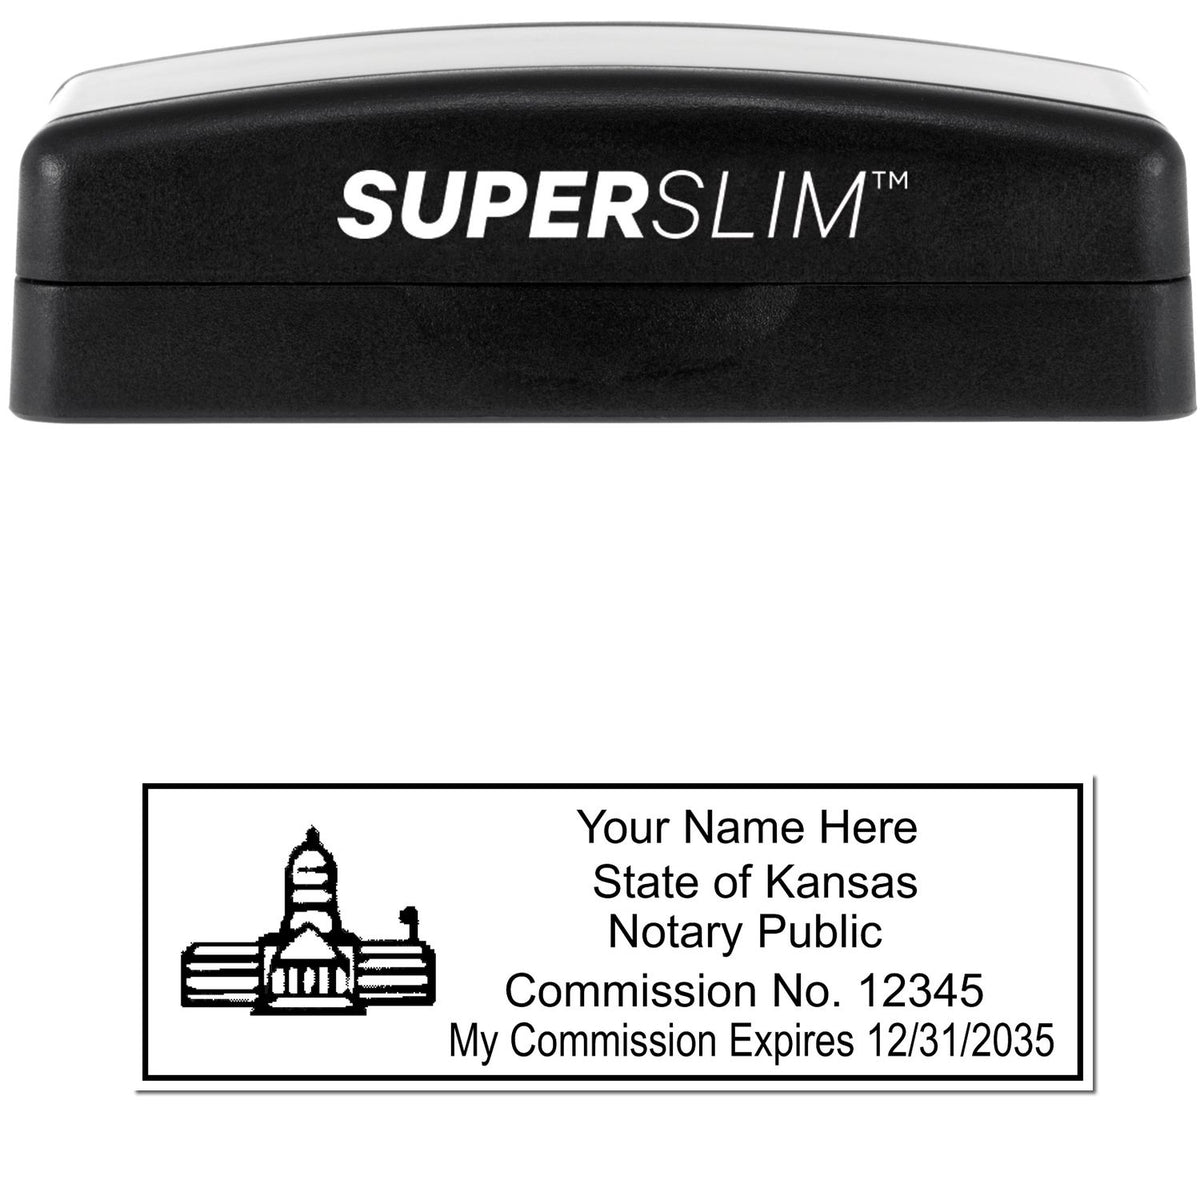 The main image for the Super Slim Kansas Notary Public Stamp depicting a sample of the imprint and electronic files